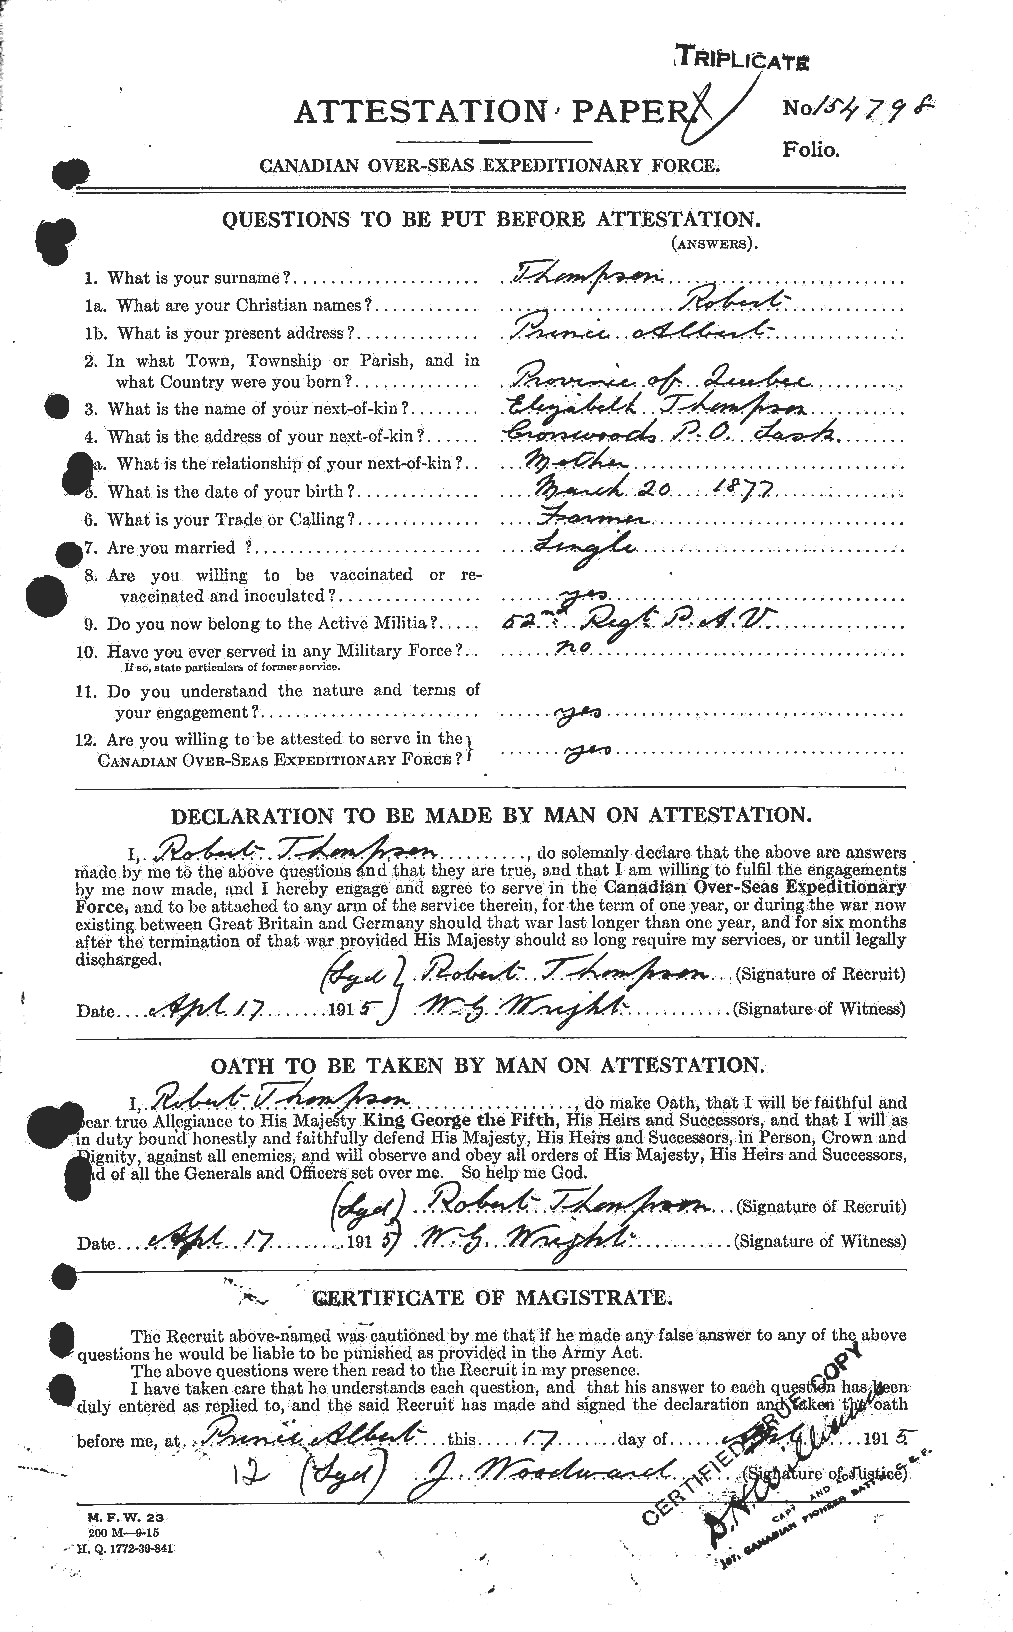 Personnel Records of the First World War - CEF 634267a